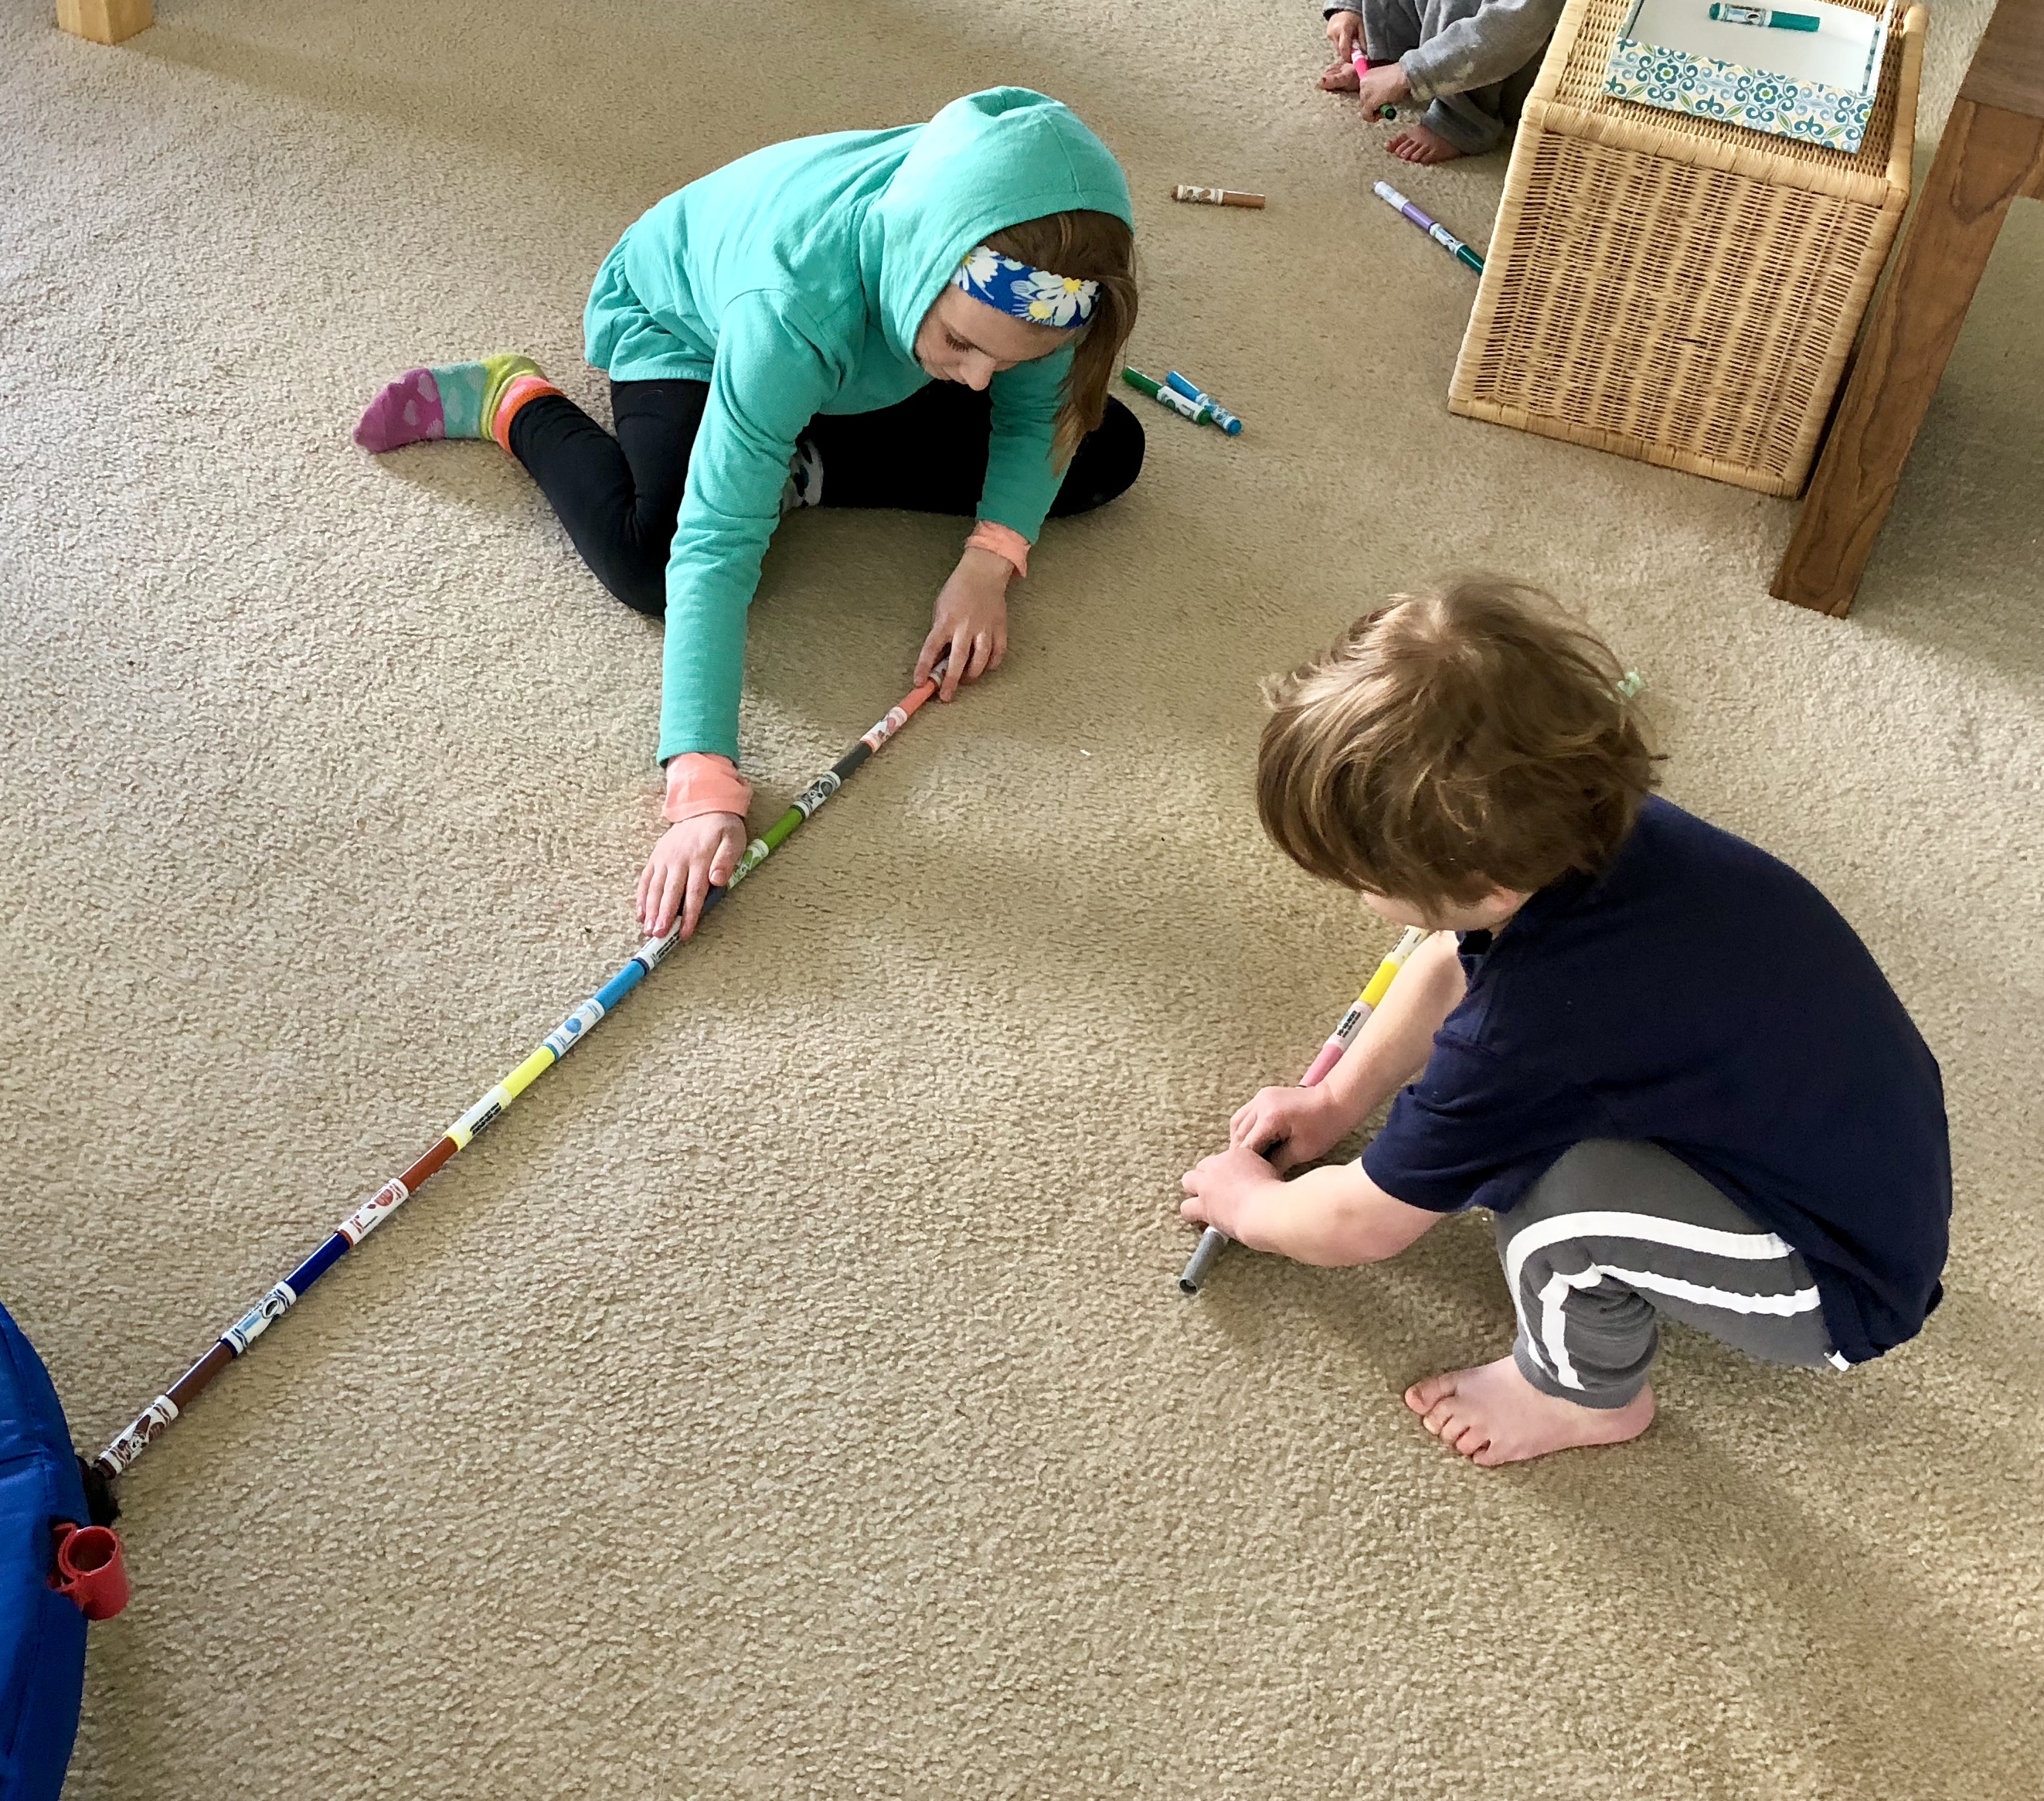 2 children building markers across the floor to reach a basket